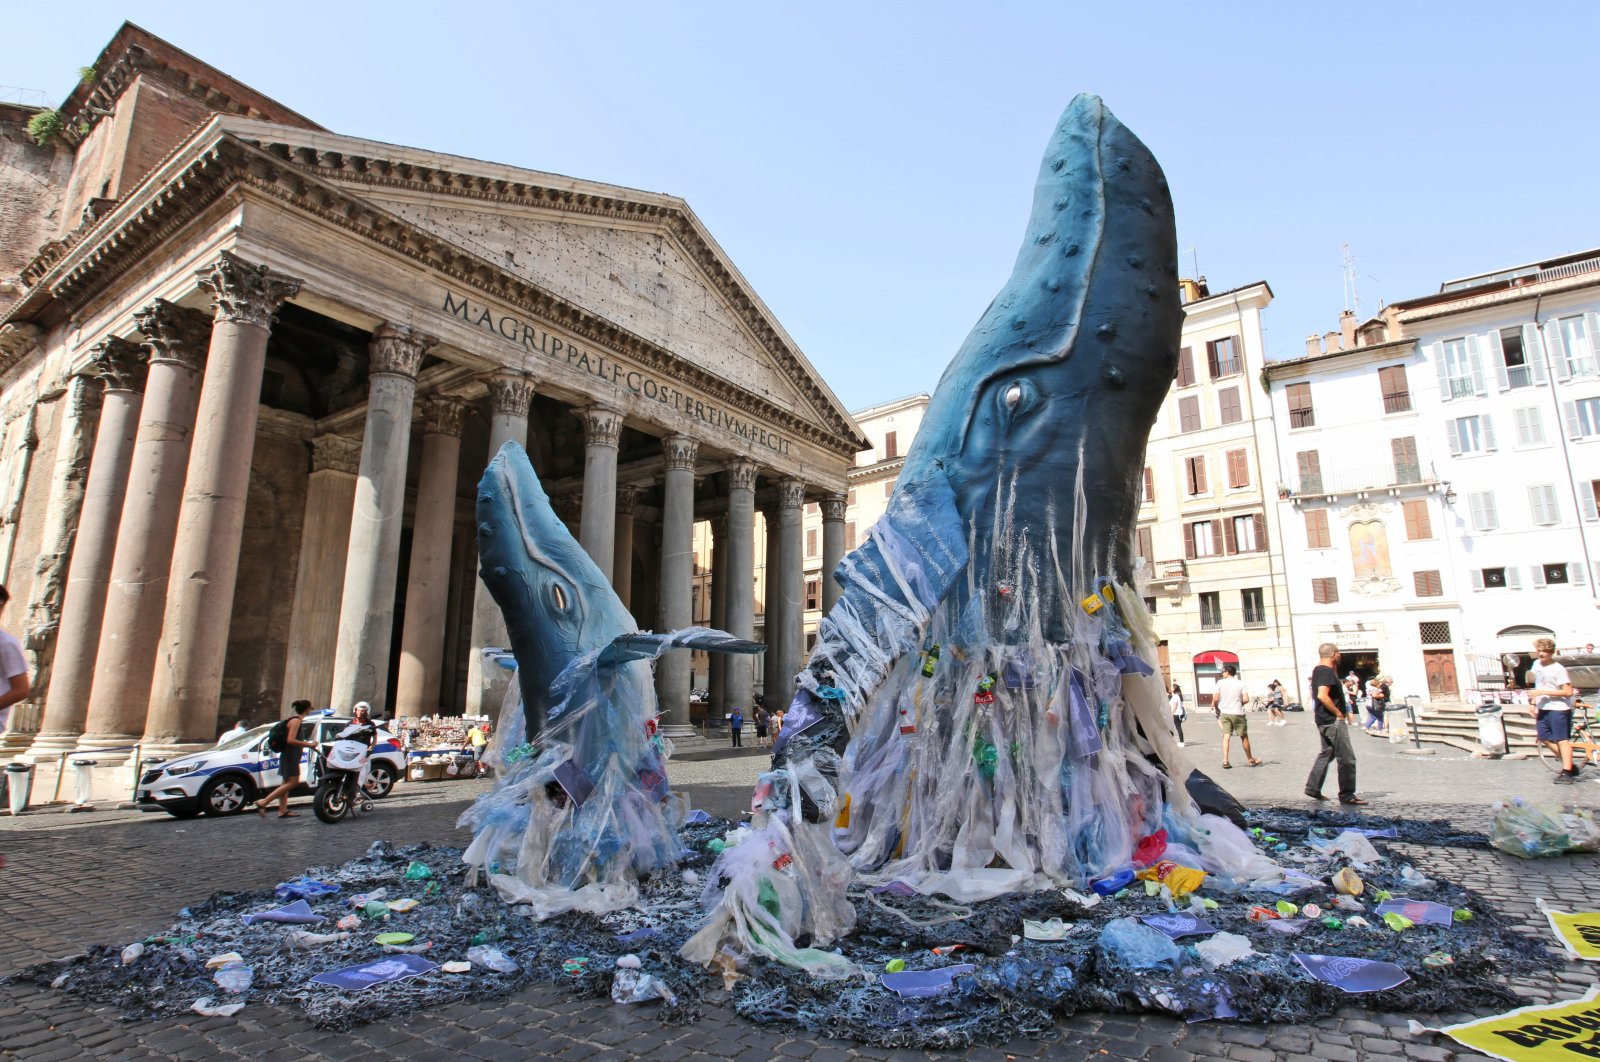 Life-size mock-up of two whales emerge from a sea filled with plastic waste in front of Rome’s Pantheon, Italy, July 5, 2018. (AP Photo)